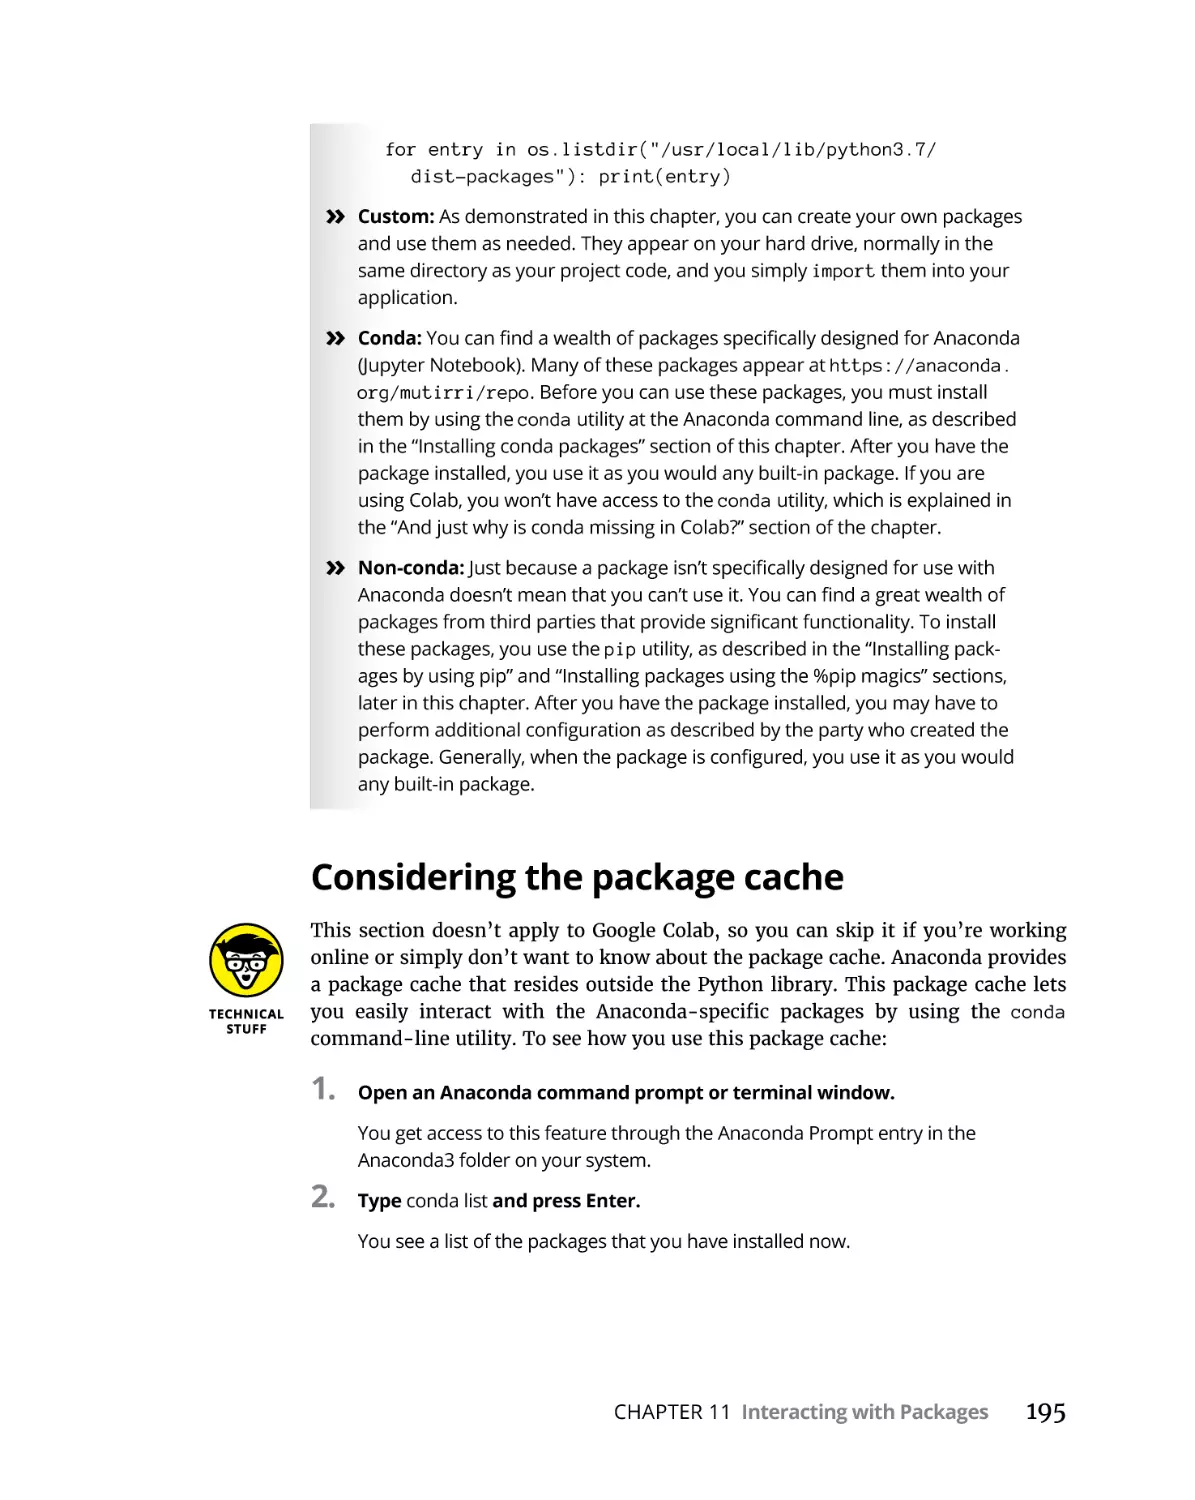 Considering the package cache